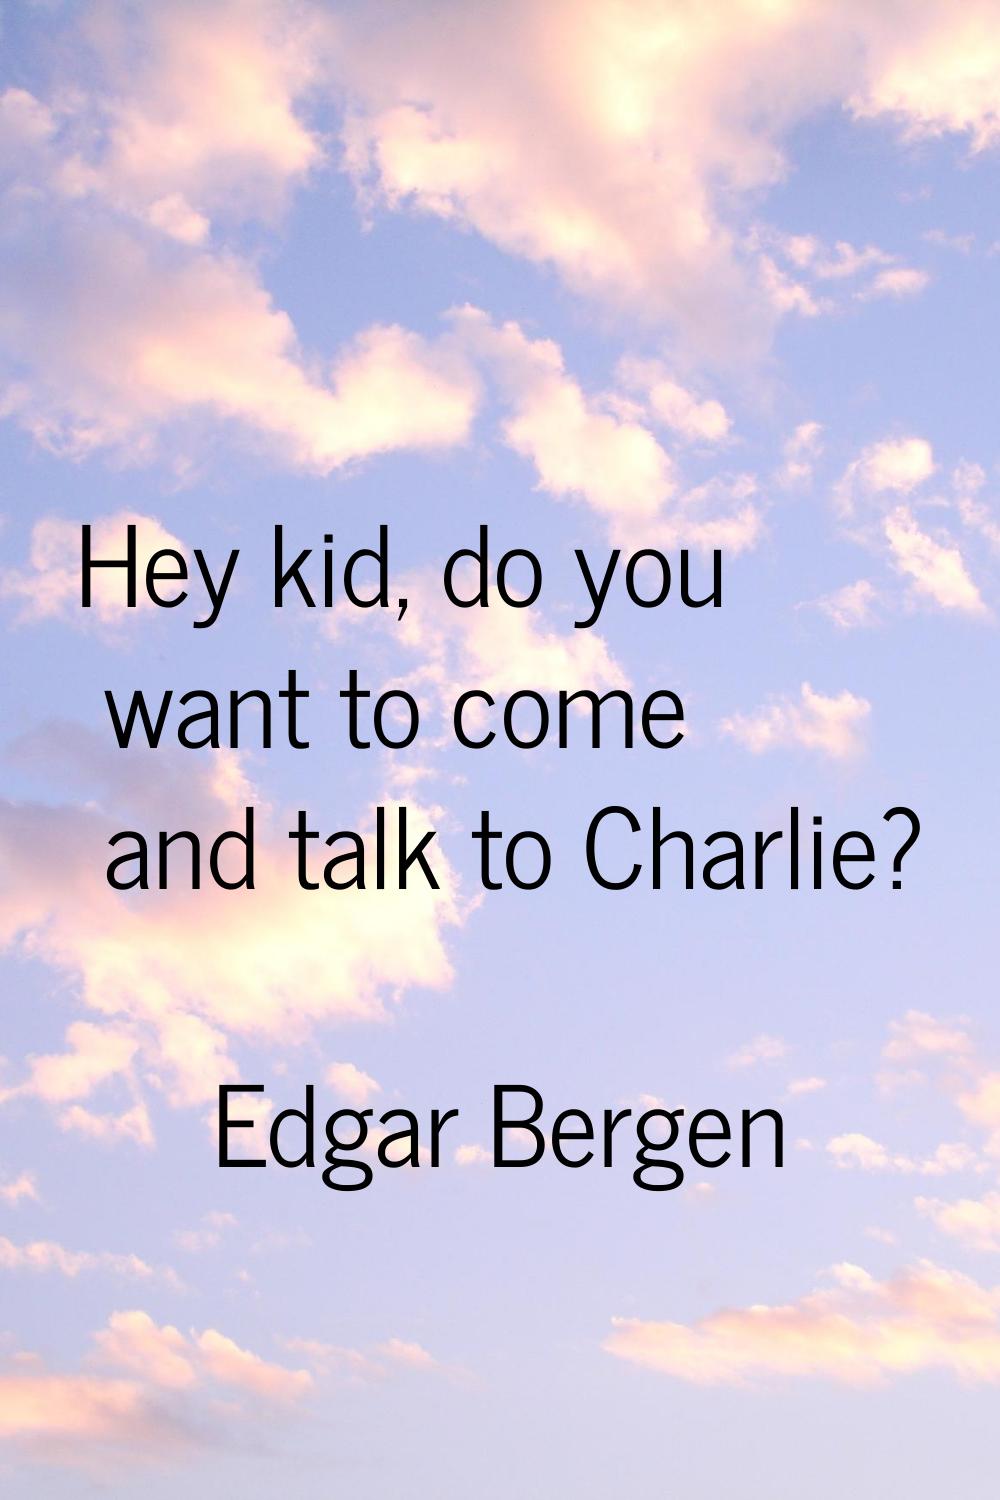 Hey kid, do you want to come and talk to Charlie?